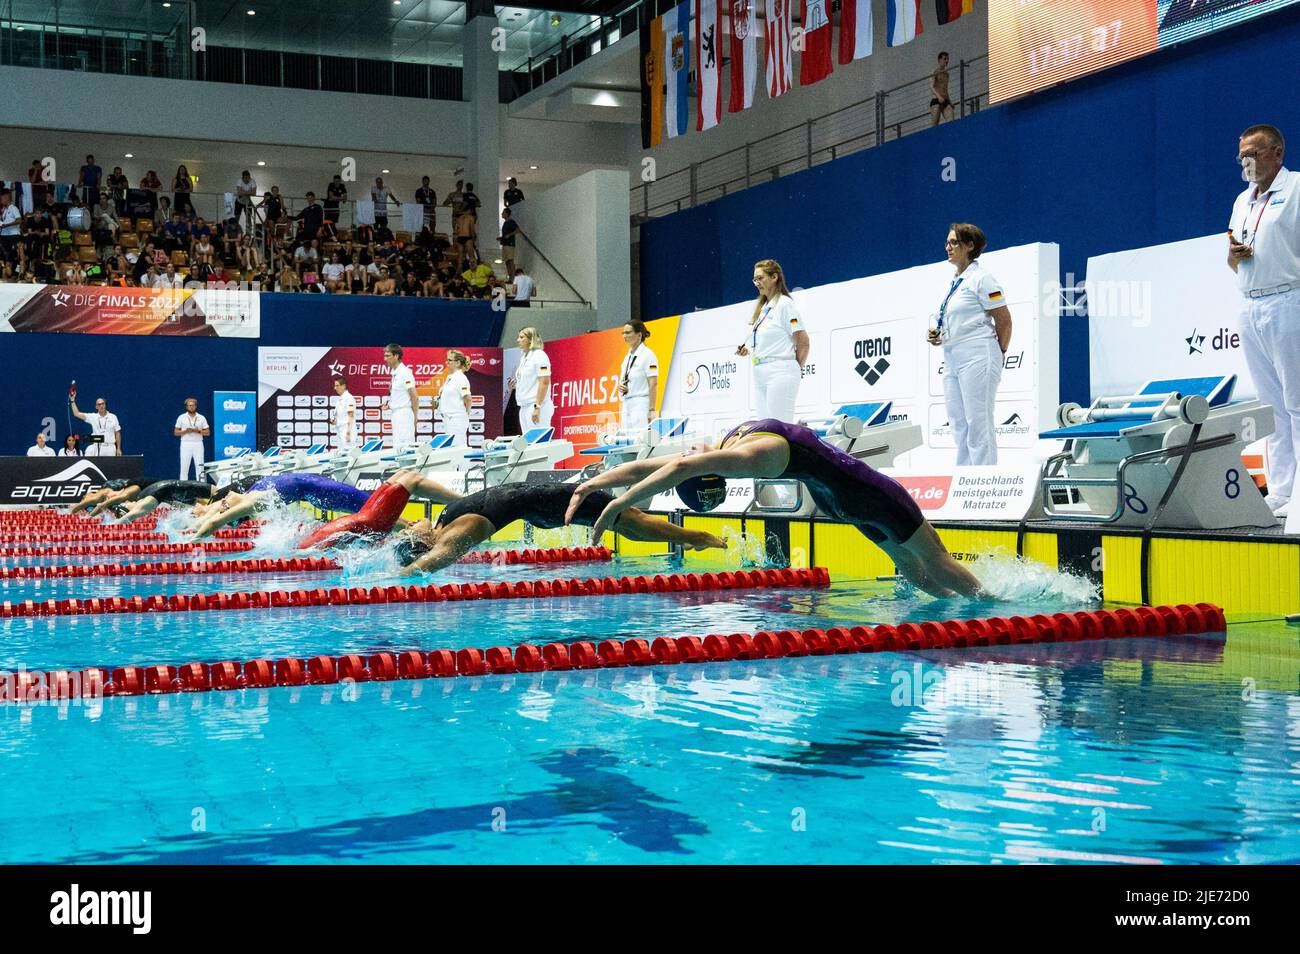 Berlin, Germany. 25th June, 2022. Swimming: German championship, decisions:  50 m breaststroke, women, award ceremony. Nele Schulze (M, 1st place),  Julia Titze (l, 2nd place) and Nicole Heidemann (3rd place) are on